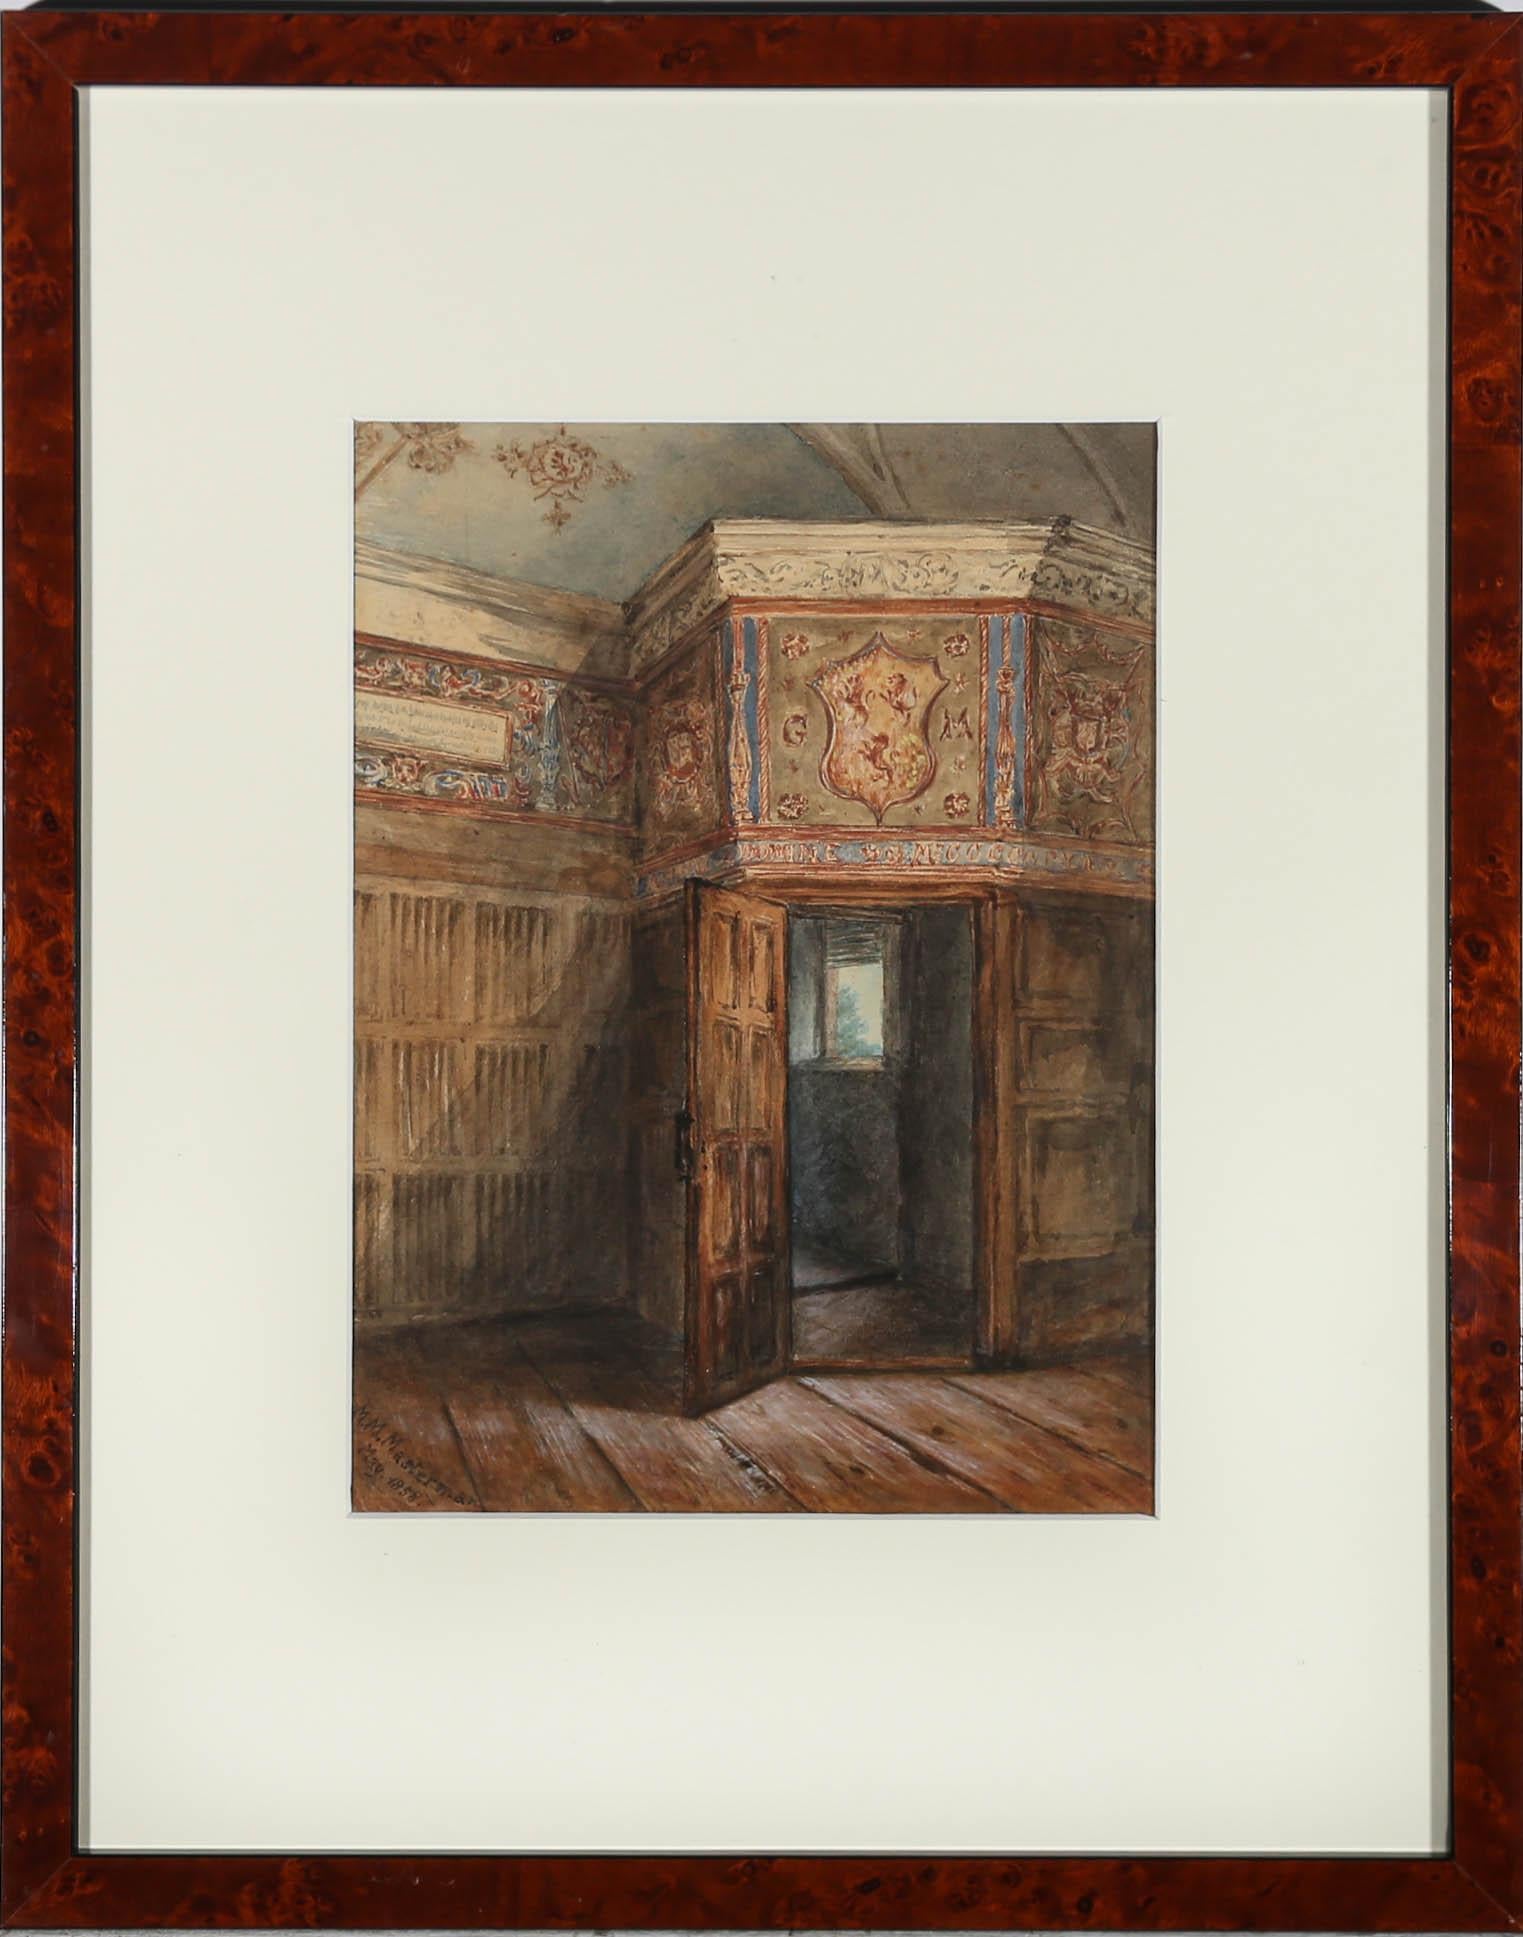 A particularly fine watercolour study of a Jacobean entranceway by Victorian artist M. M. Masterman. The craftsmanship in the cornice and carpentry in the room instantly grabs your attention, testament to the artist's fine brushwork and